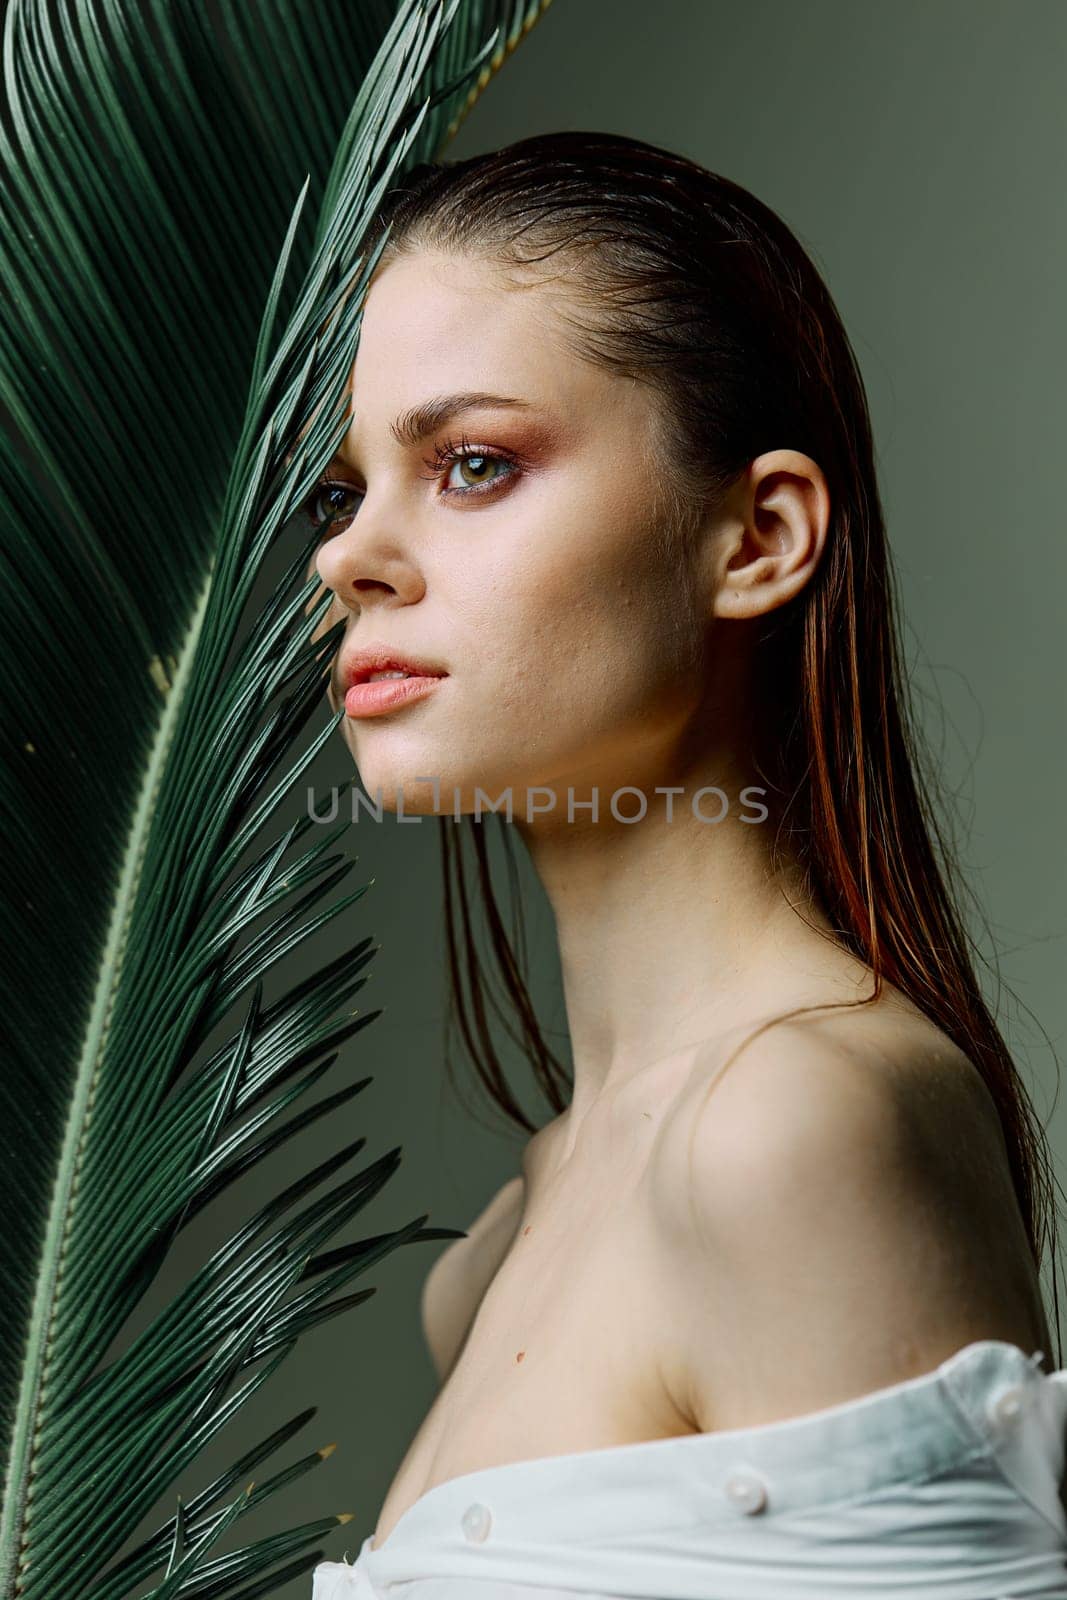 vertical photo portrait of an elegant woman with her hair slicked back, standing with a palm leaf holding it near her face. High quality photo